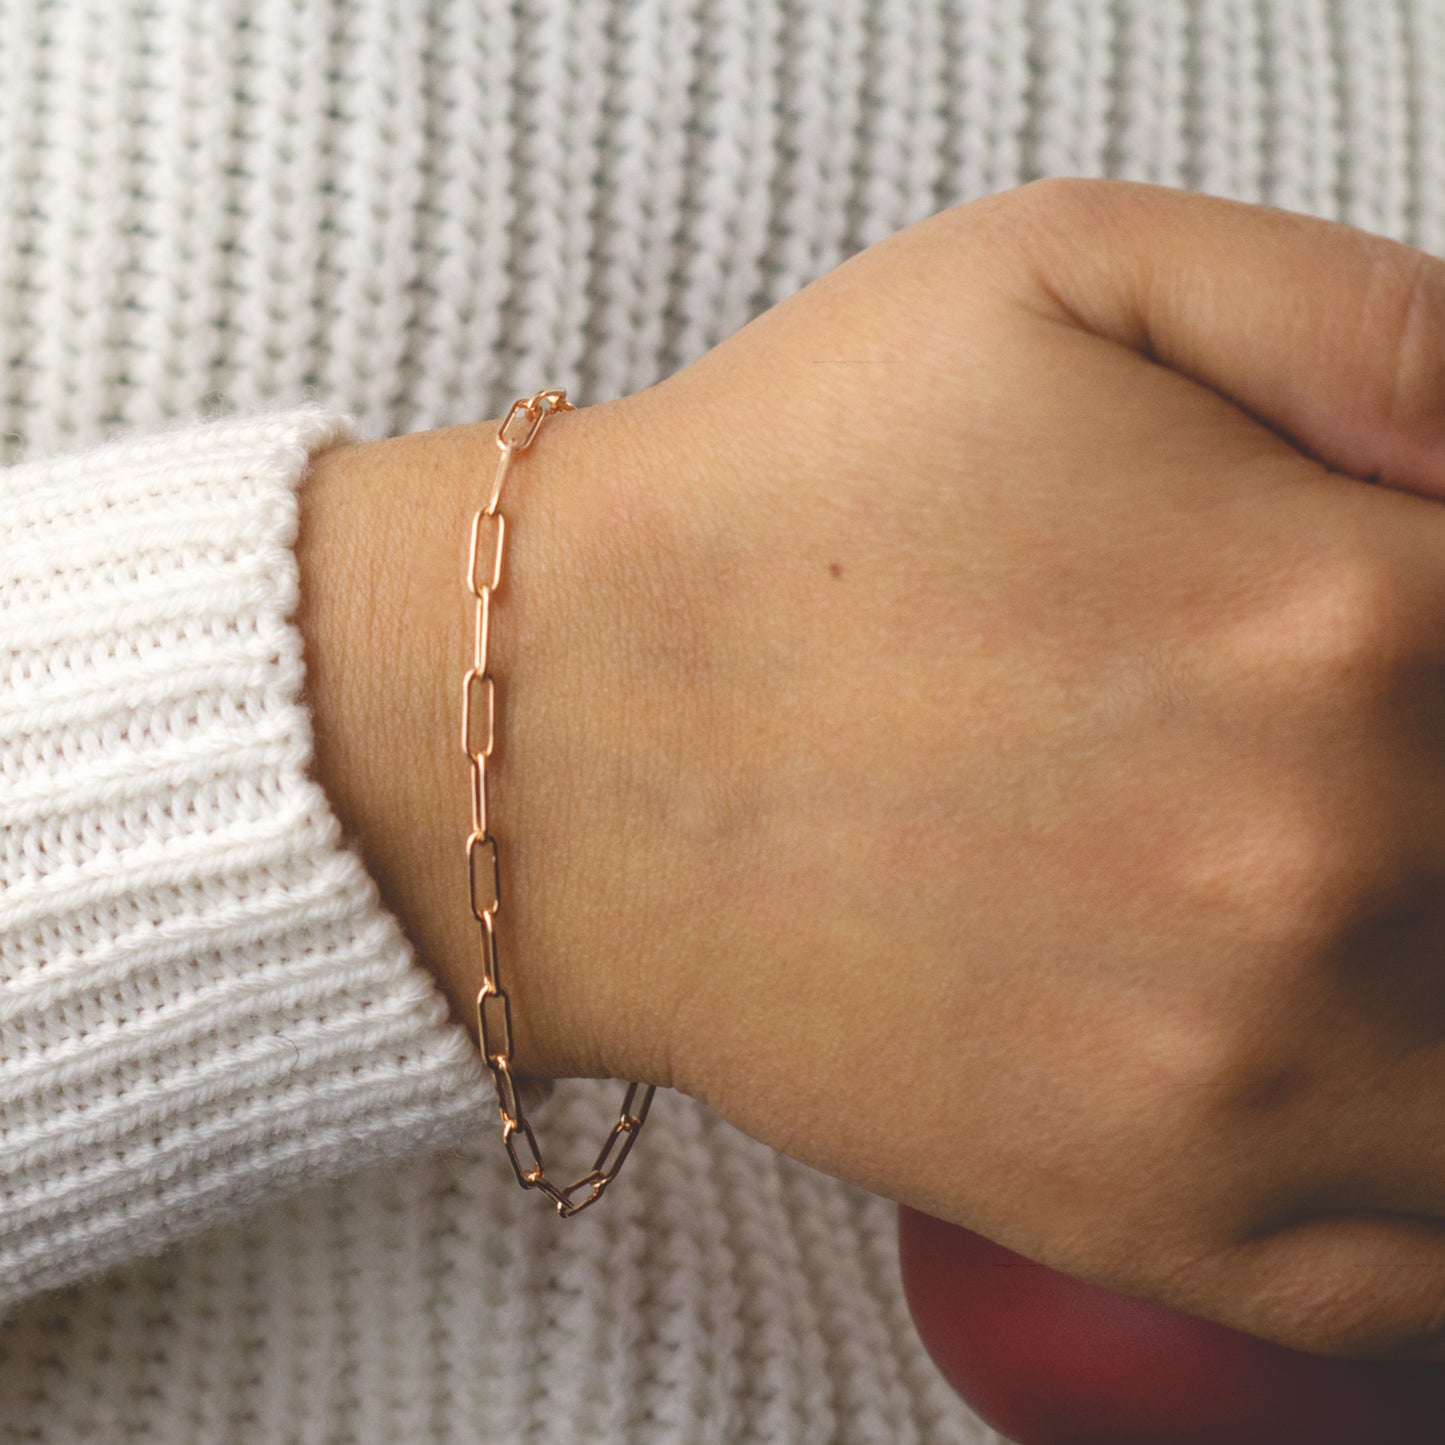 Woman wearing a 14K rose gold fill paperclip chain bracelet with a classic style (large) link size